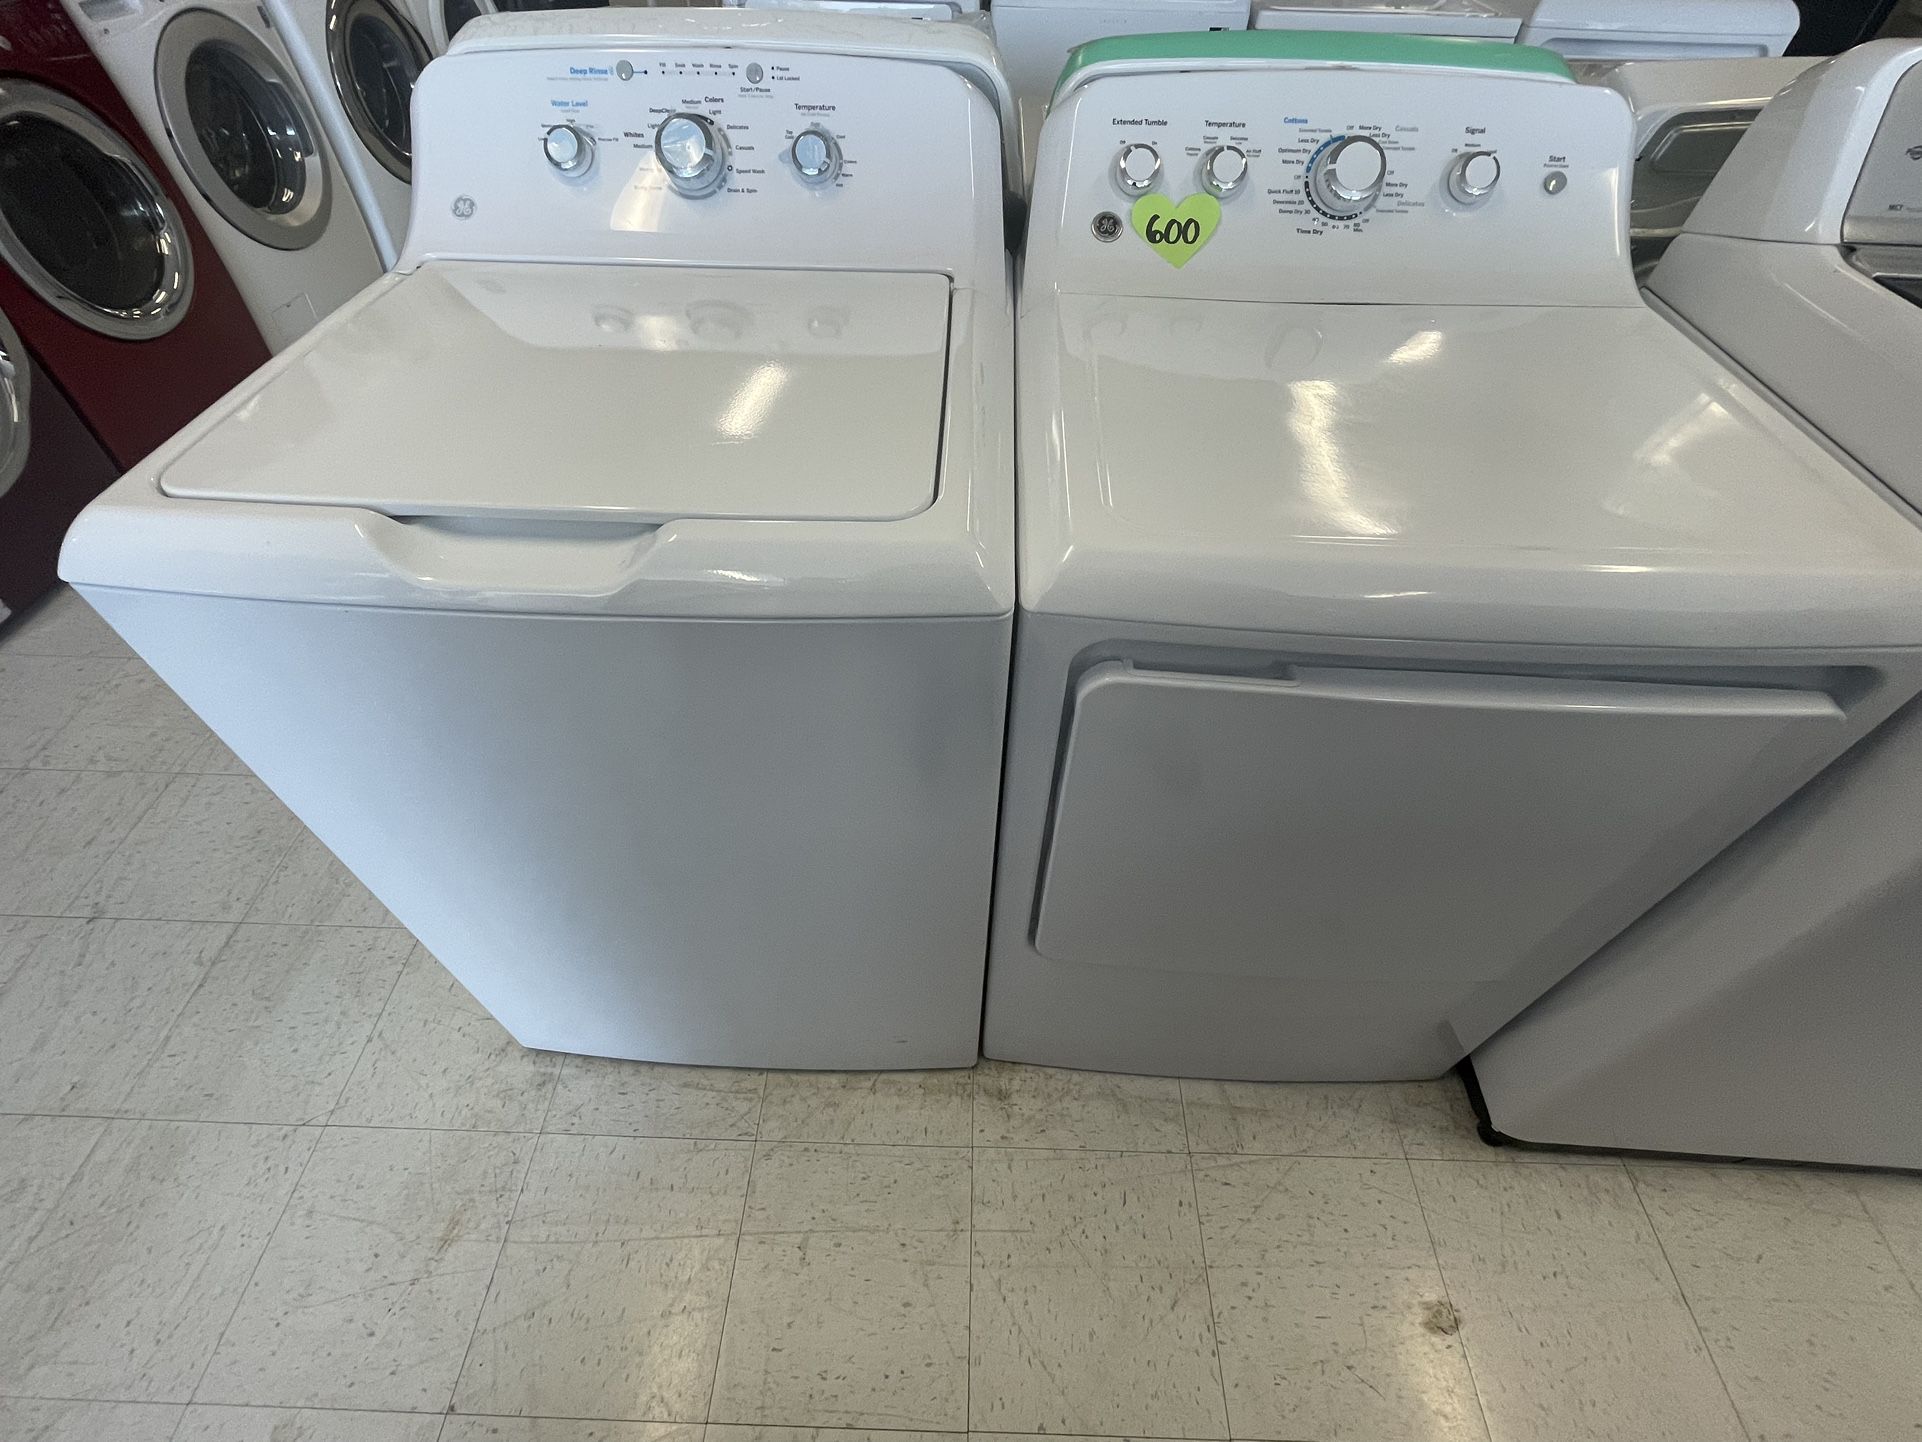 Ge Top Load Washer And Electric Dryer Set 90days Warranty 